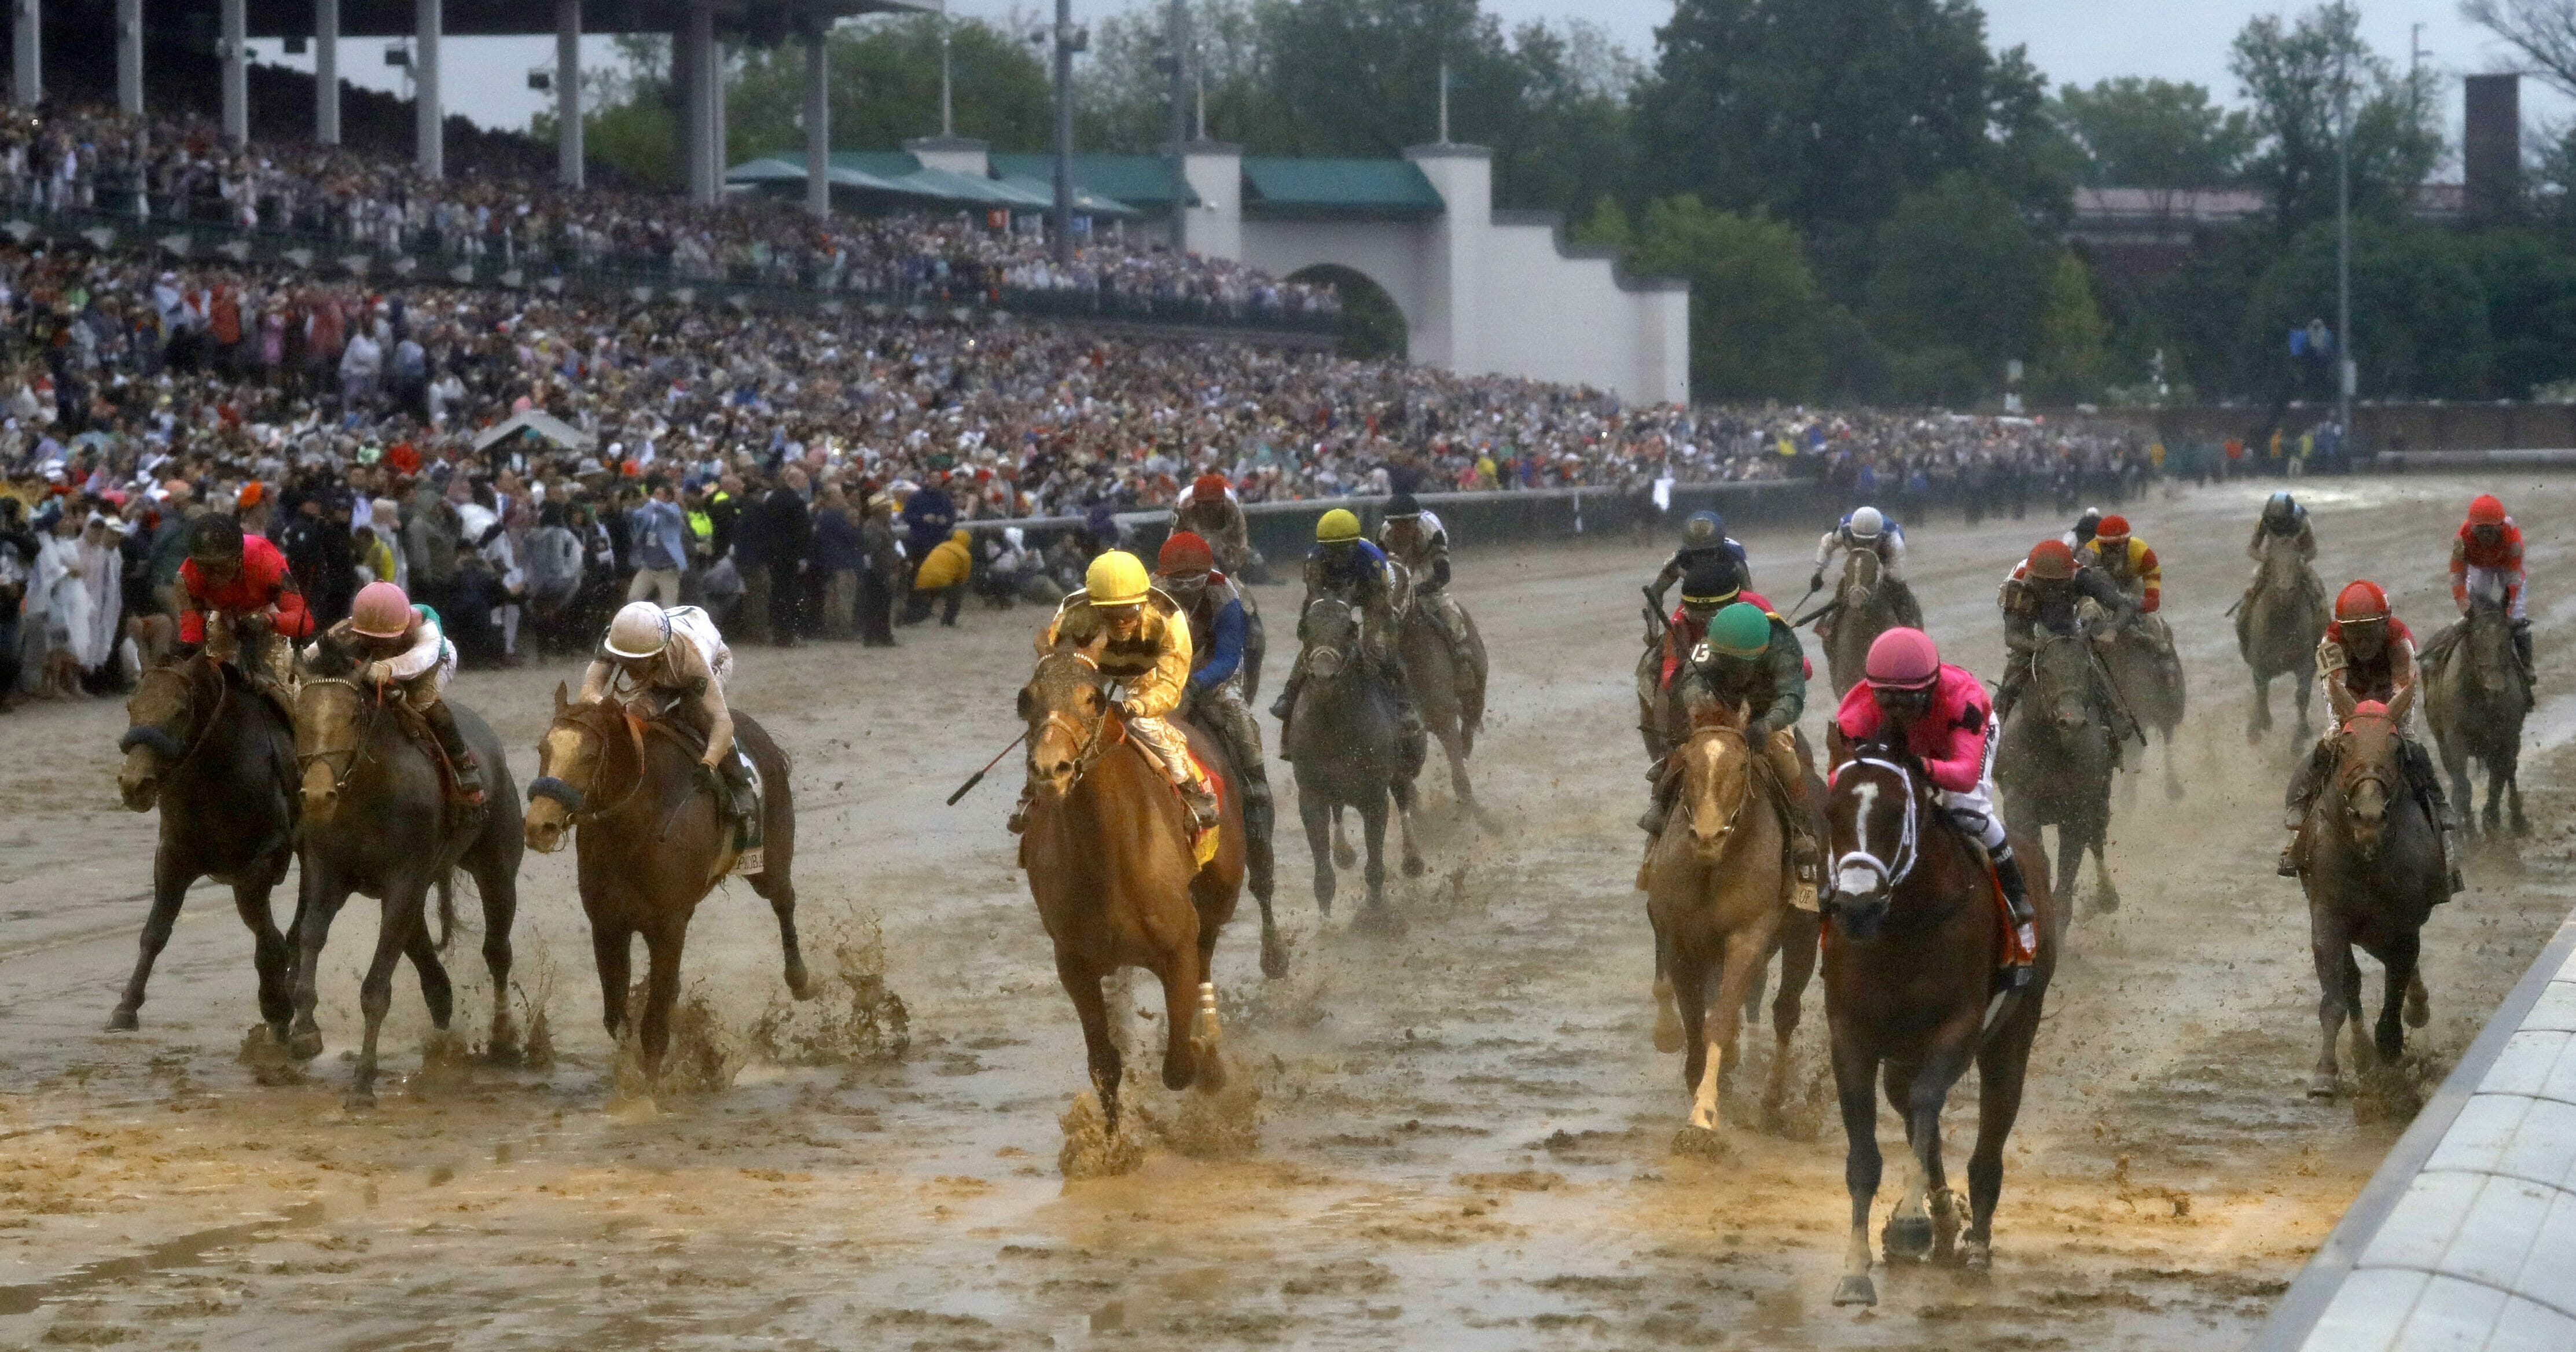 Luis Saez rides Maximum Security across the finish line first, followed by Flavien Prat on Country House, during the 145th running of the Kentucky Derby.